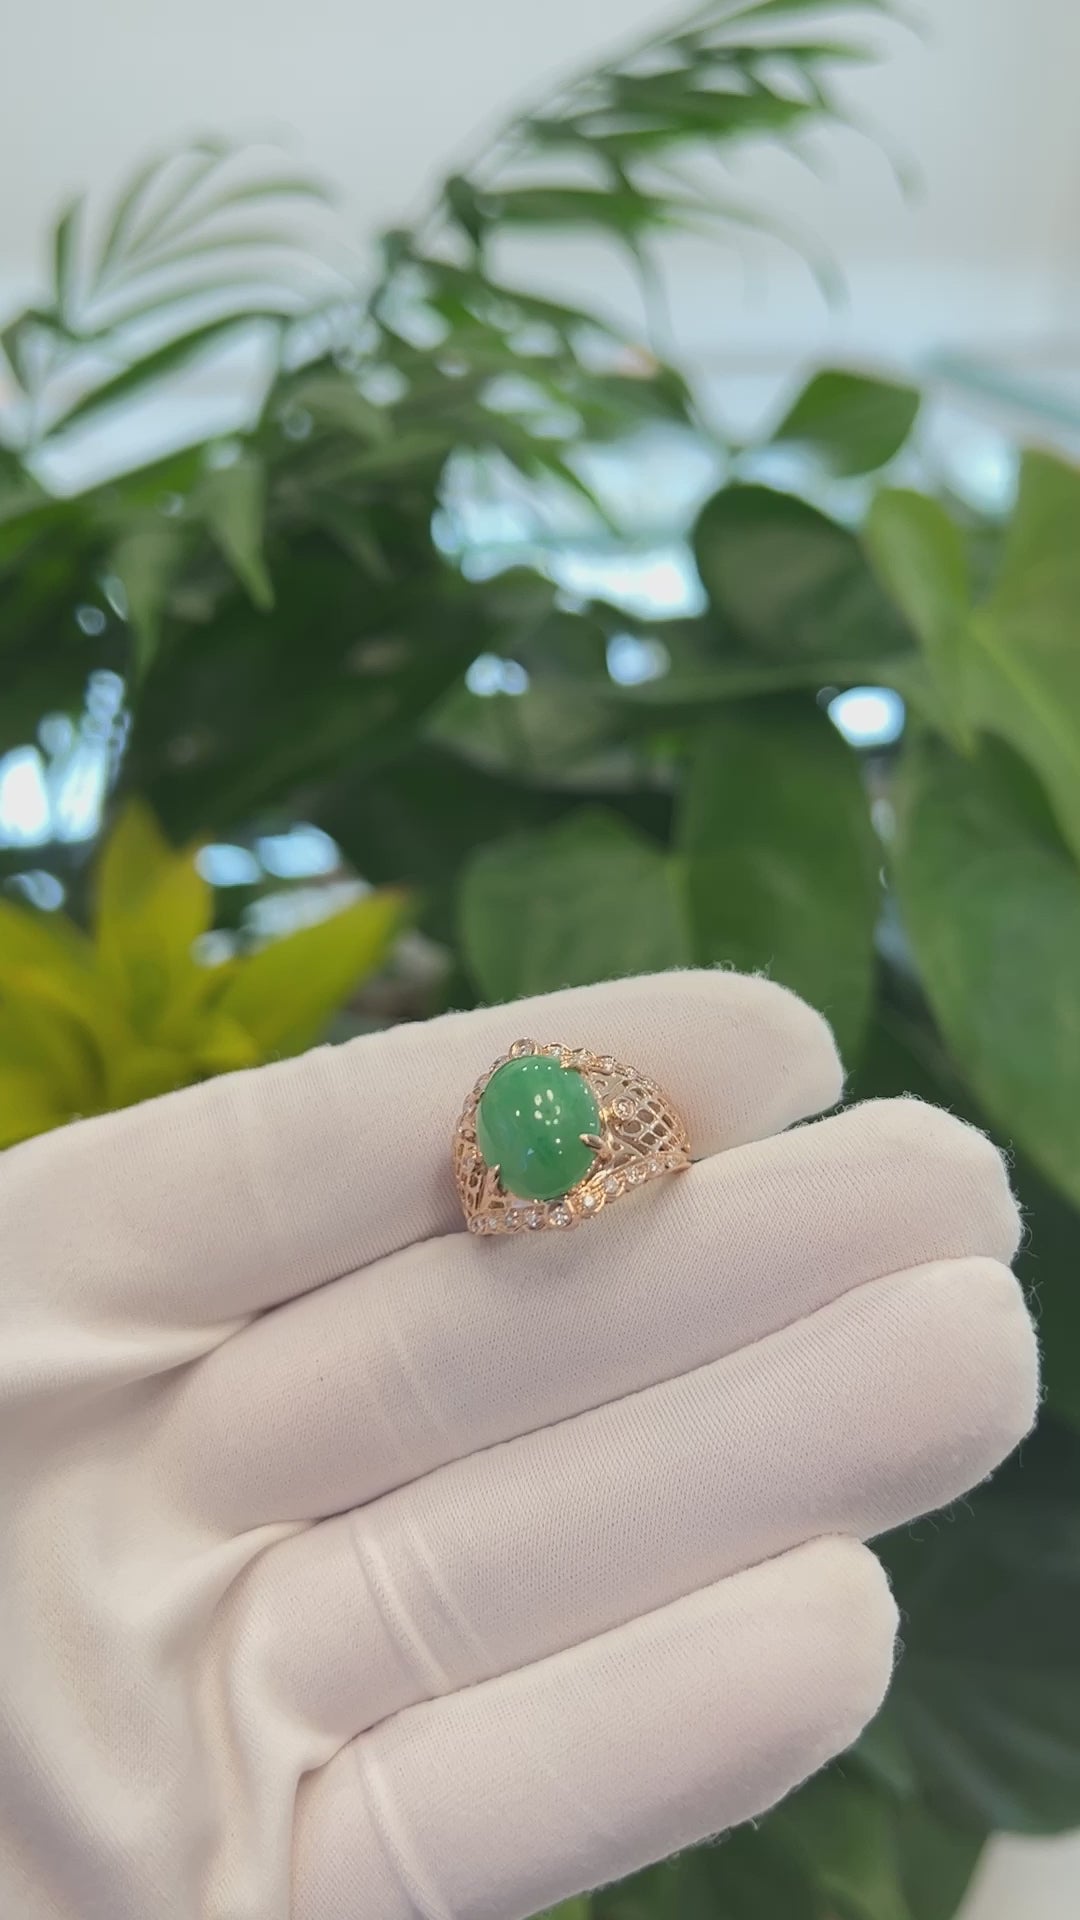 Buy Authentic Jade Diamond Ring, Light Green Jadeite Wedding Ring, Imperial  Vintage Jadeite Engagement Ring, Dainty Ice Jade Stone Ring for Sale Online  in India - Etsy